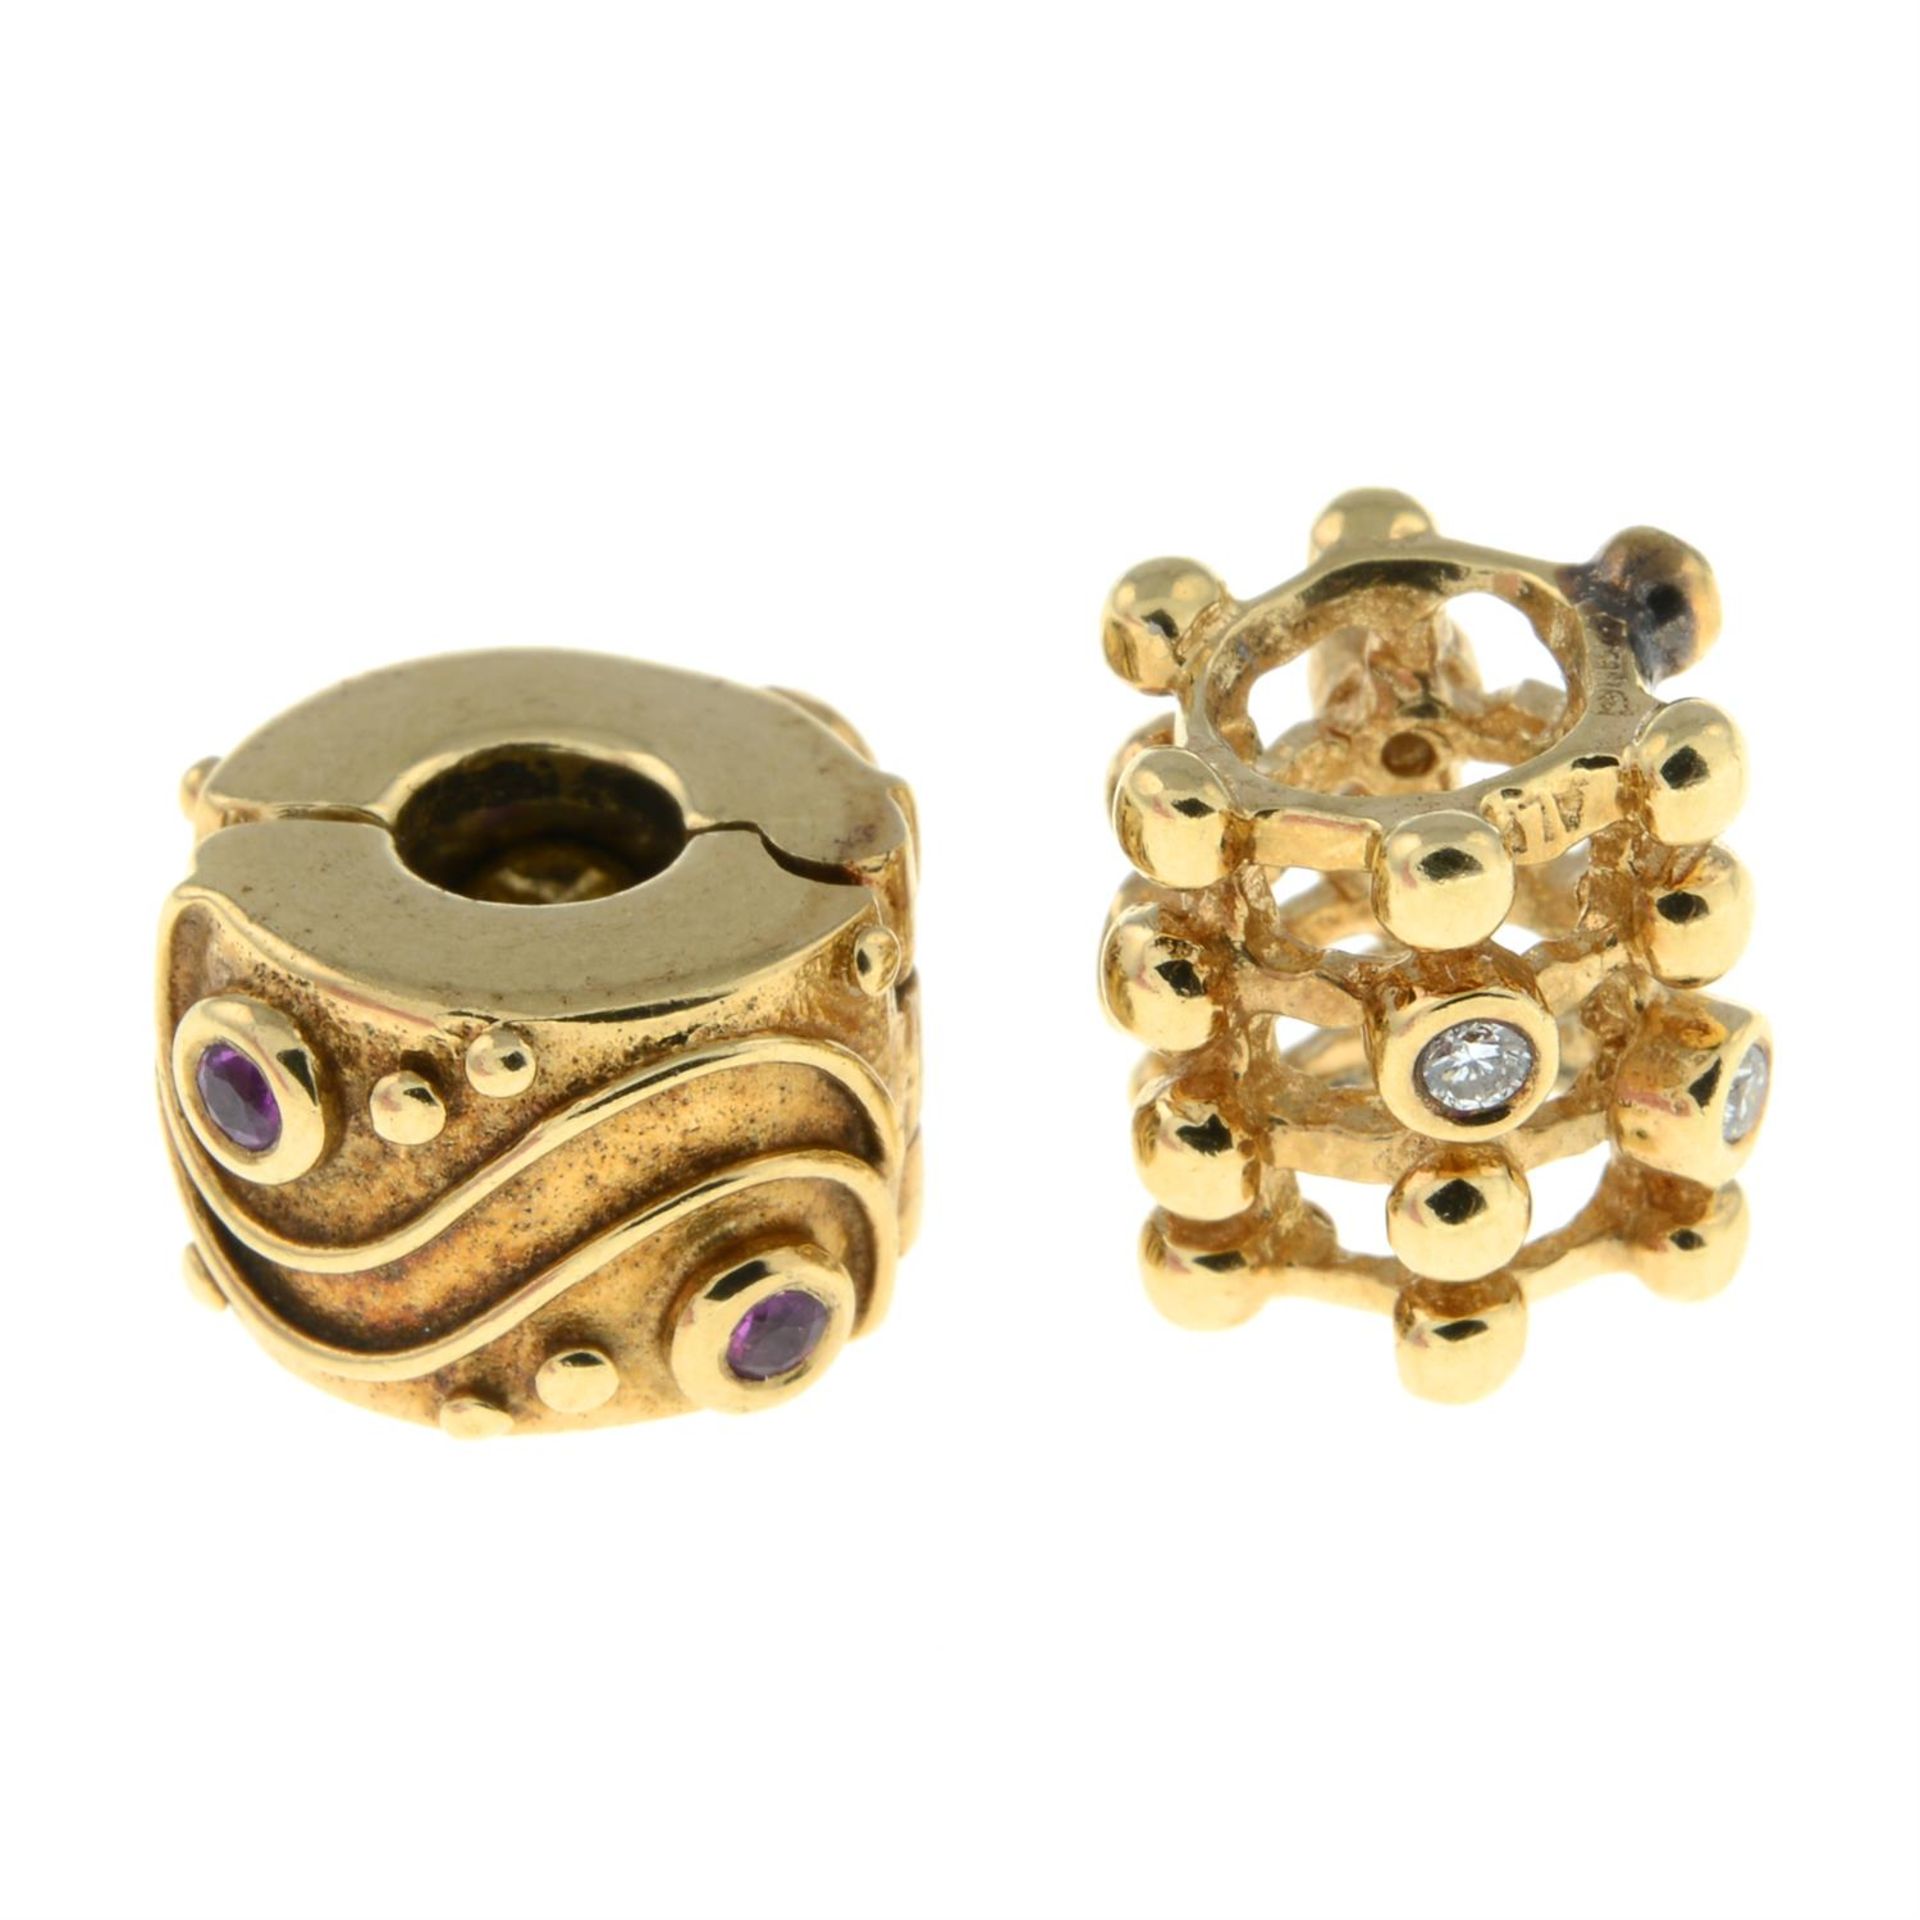 Two 14ct gold gem-set charms.